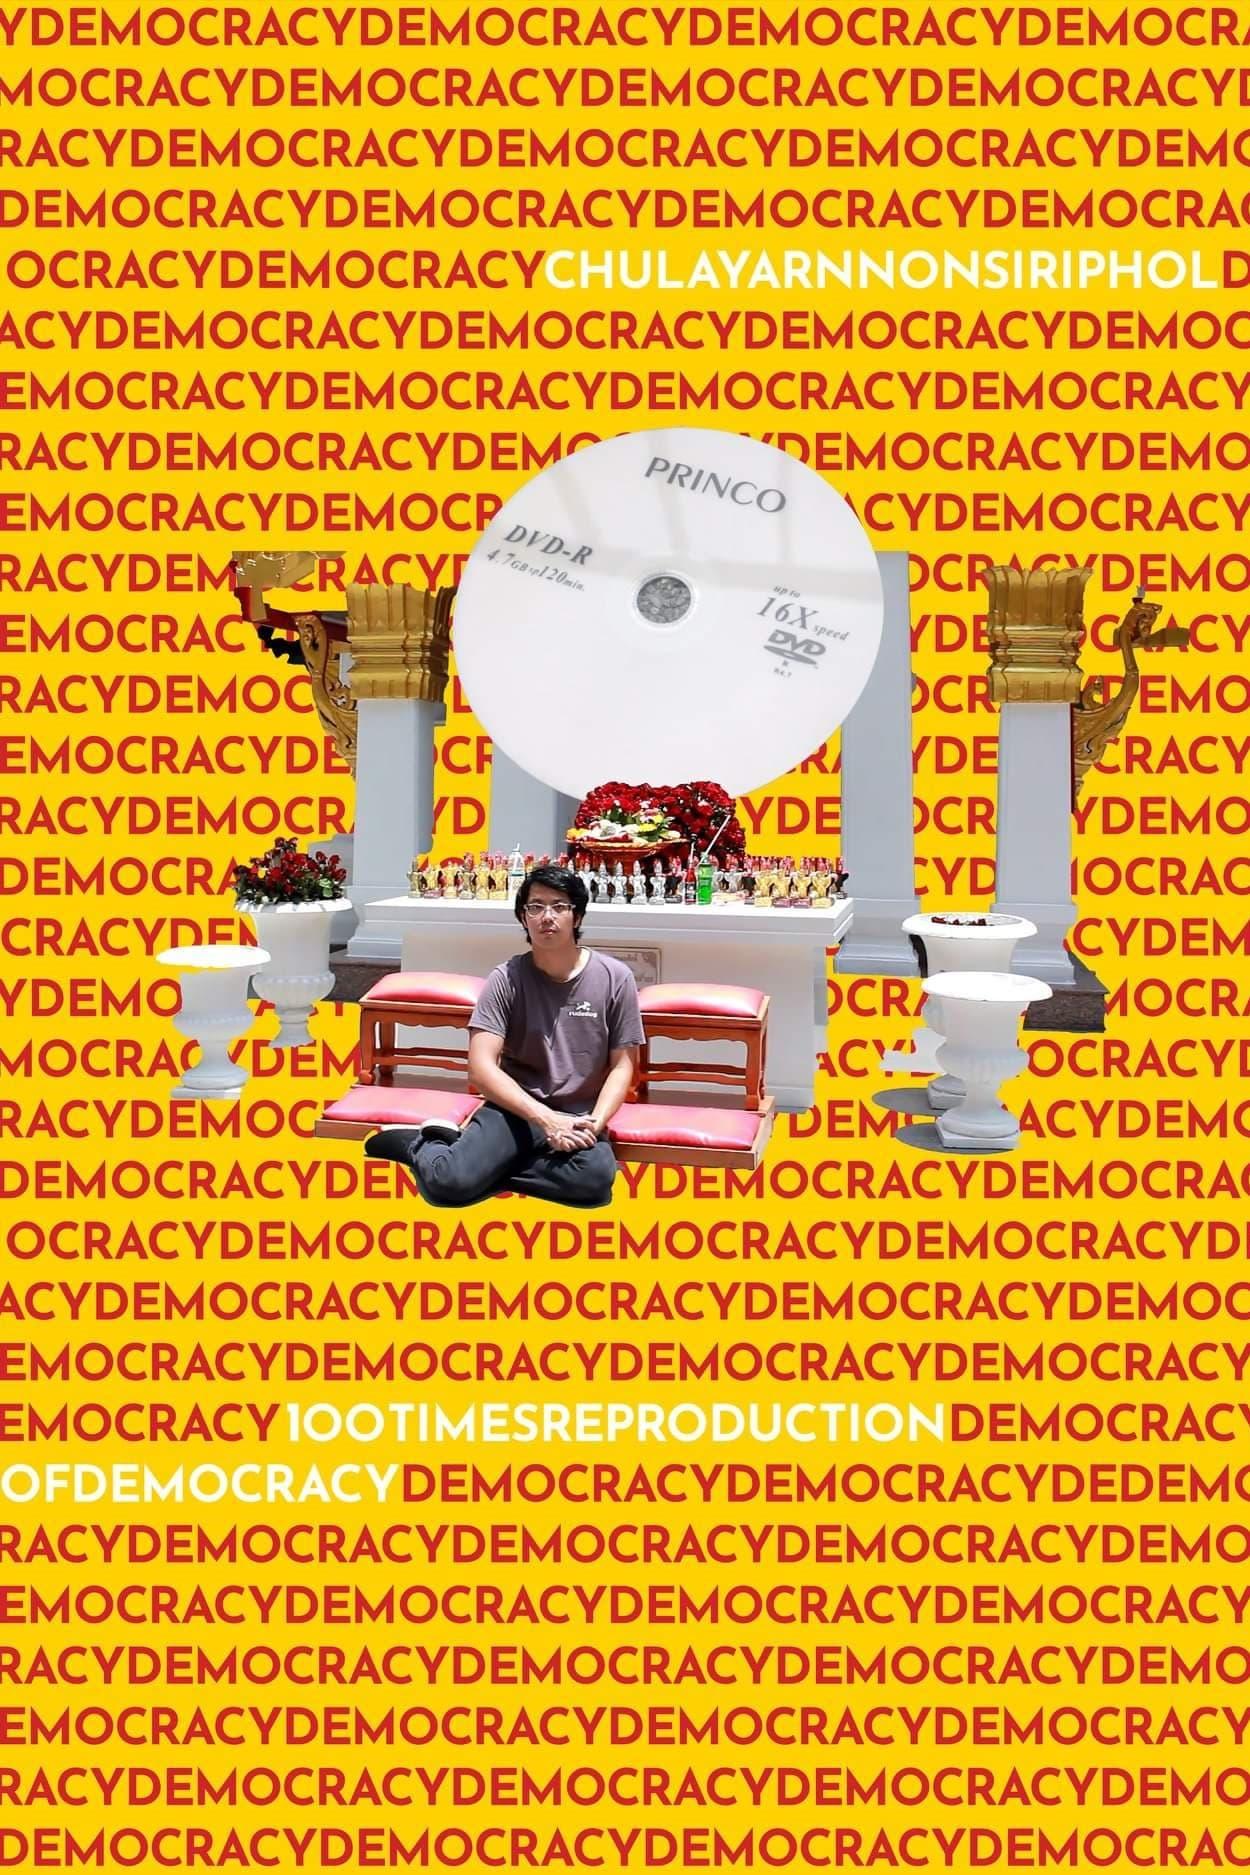 100 Times Reproduction of Democracy poster